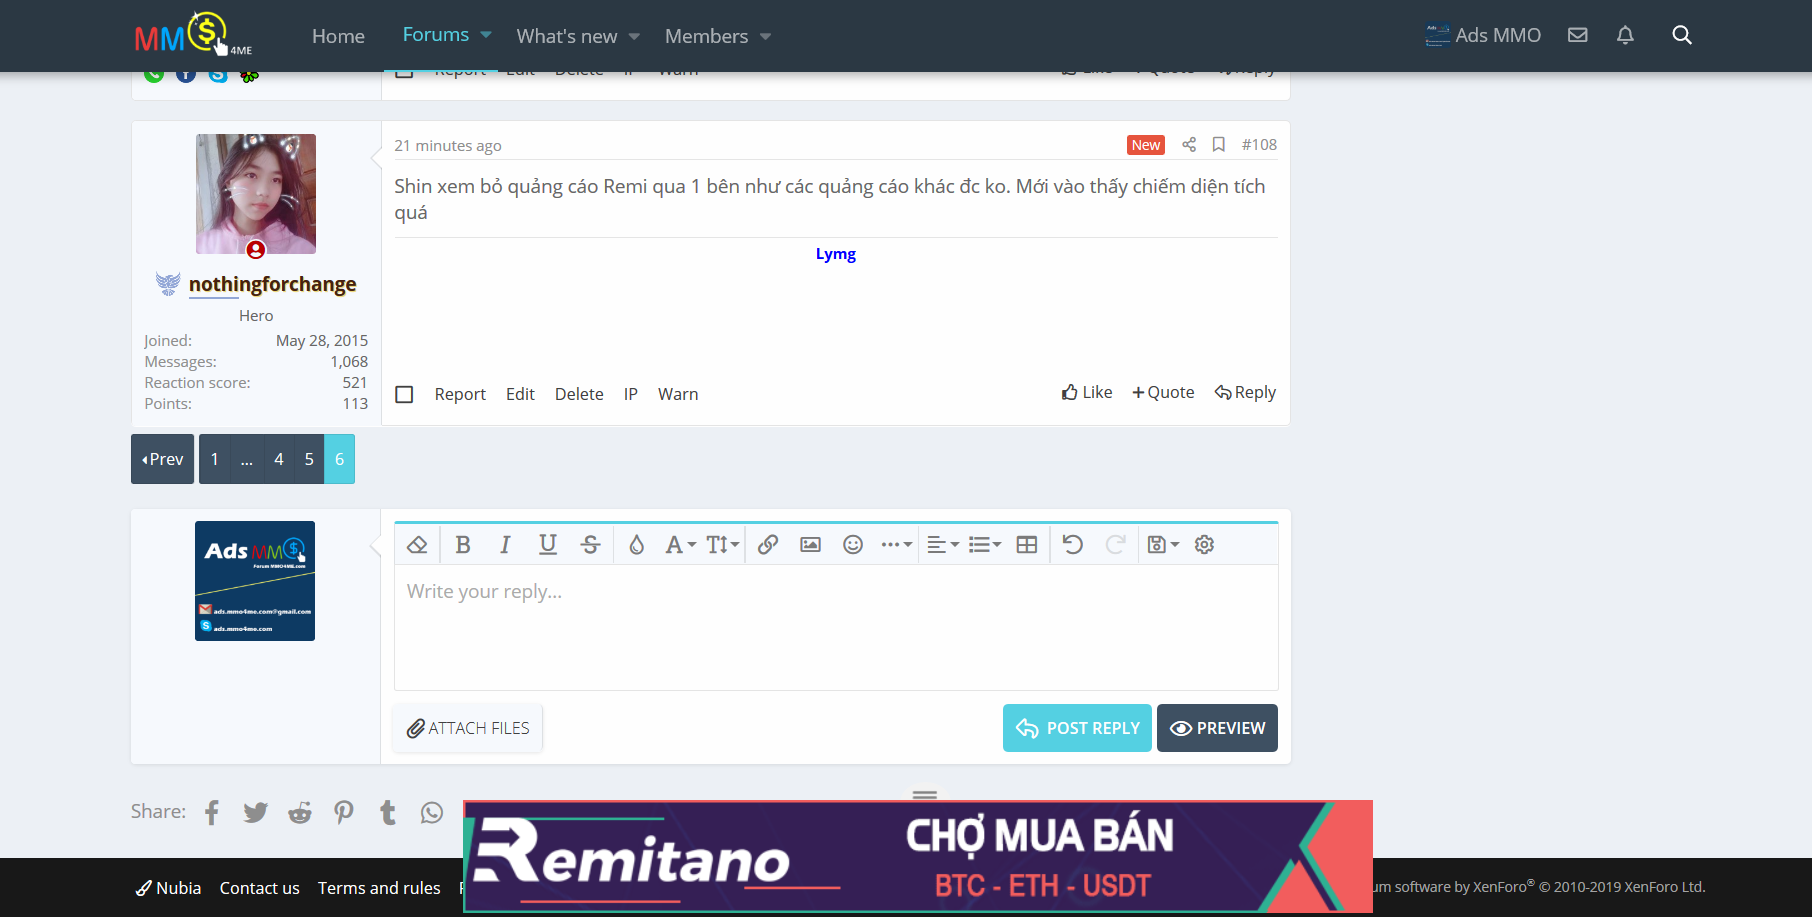 Screenshot_2019-08-17 Suggest - Giao diện forum mmo4me mới .png